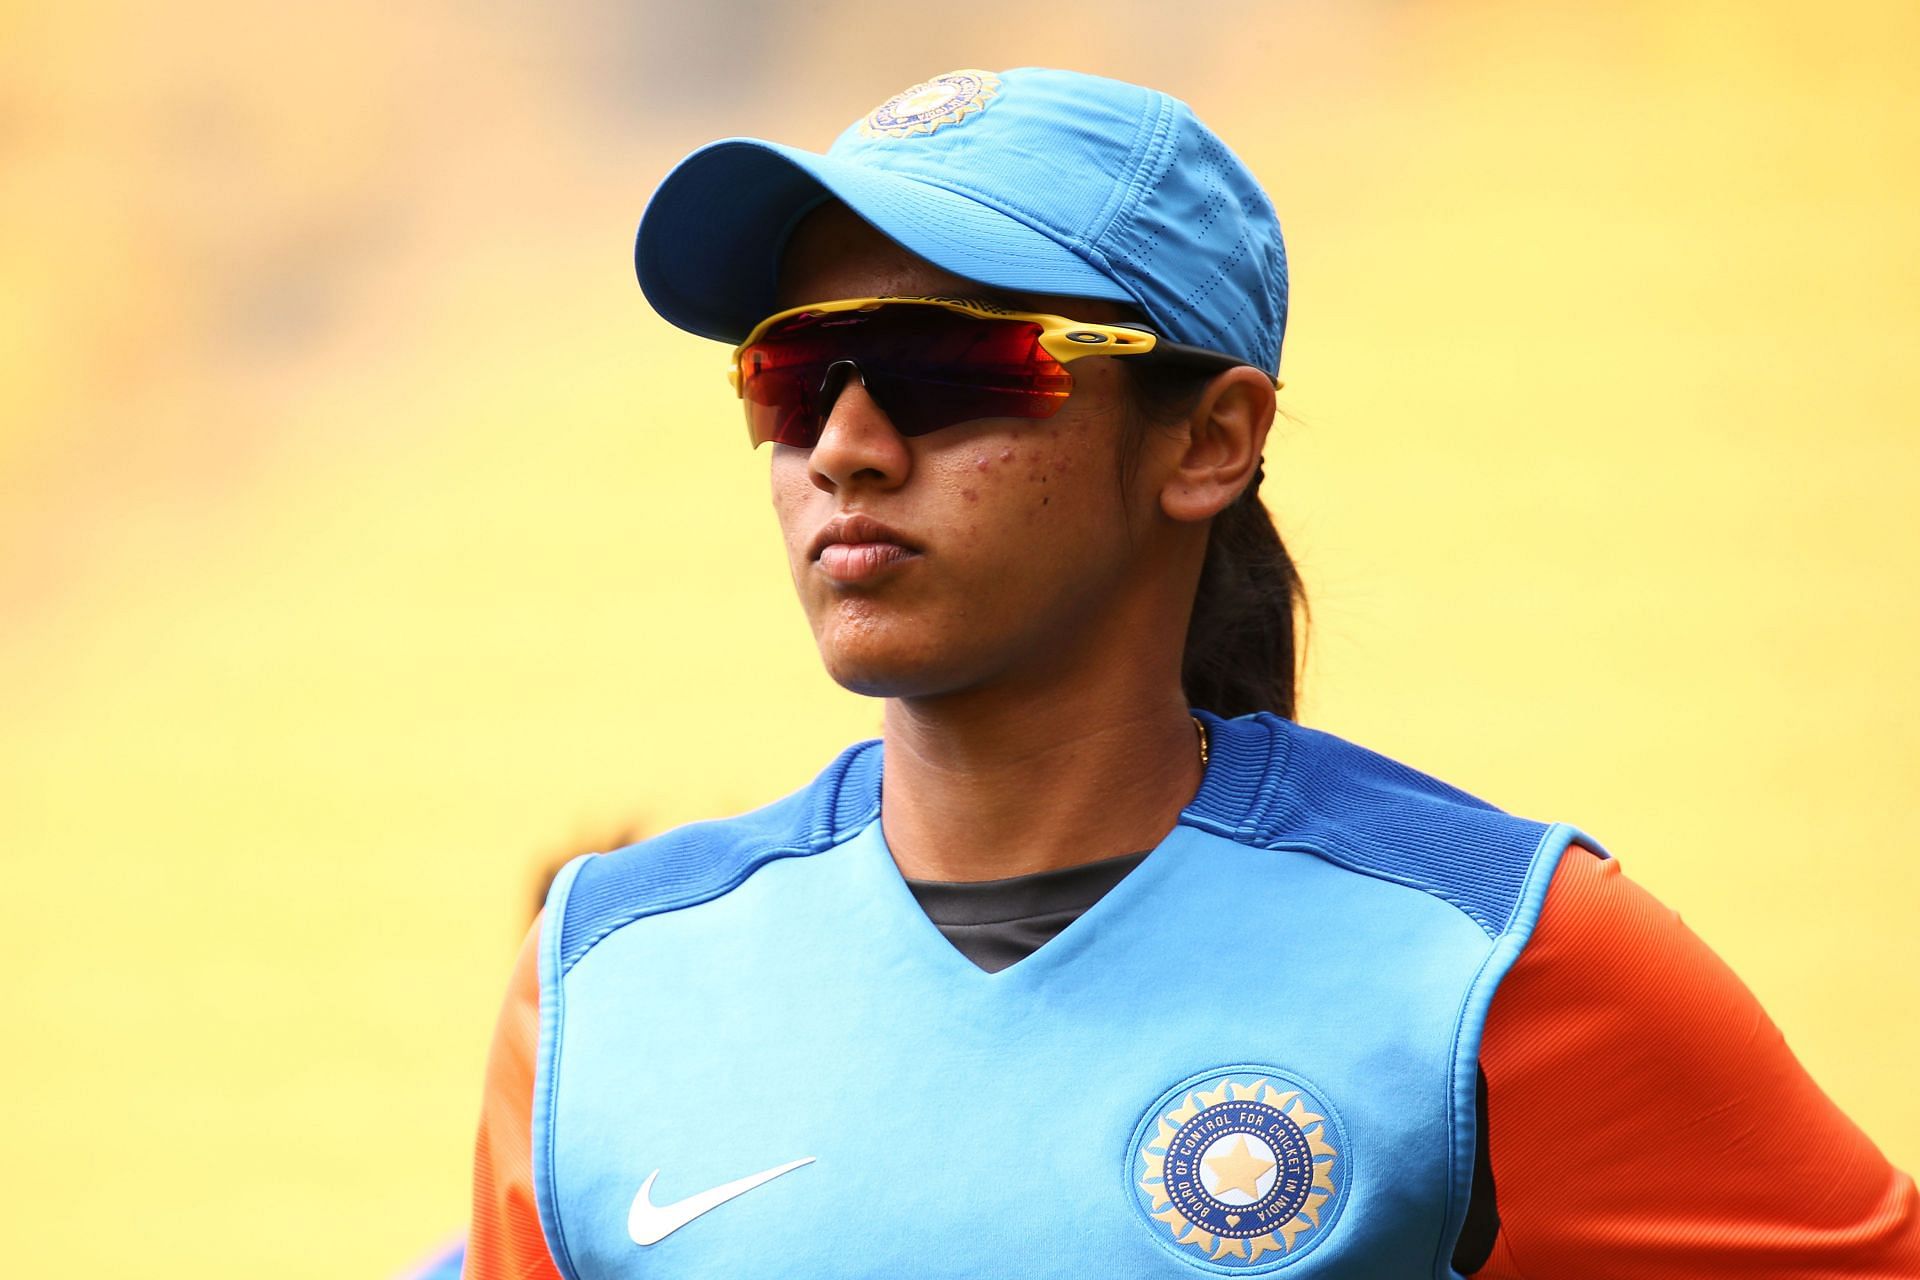 Smriti Mandhana will be one of India's key players at the 2022 FIFA Women's World Cup